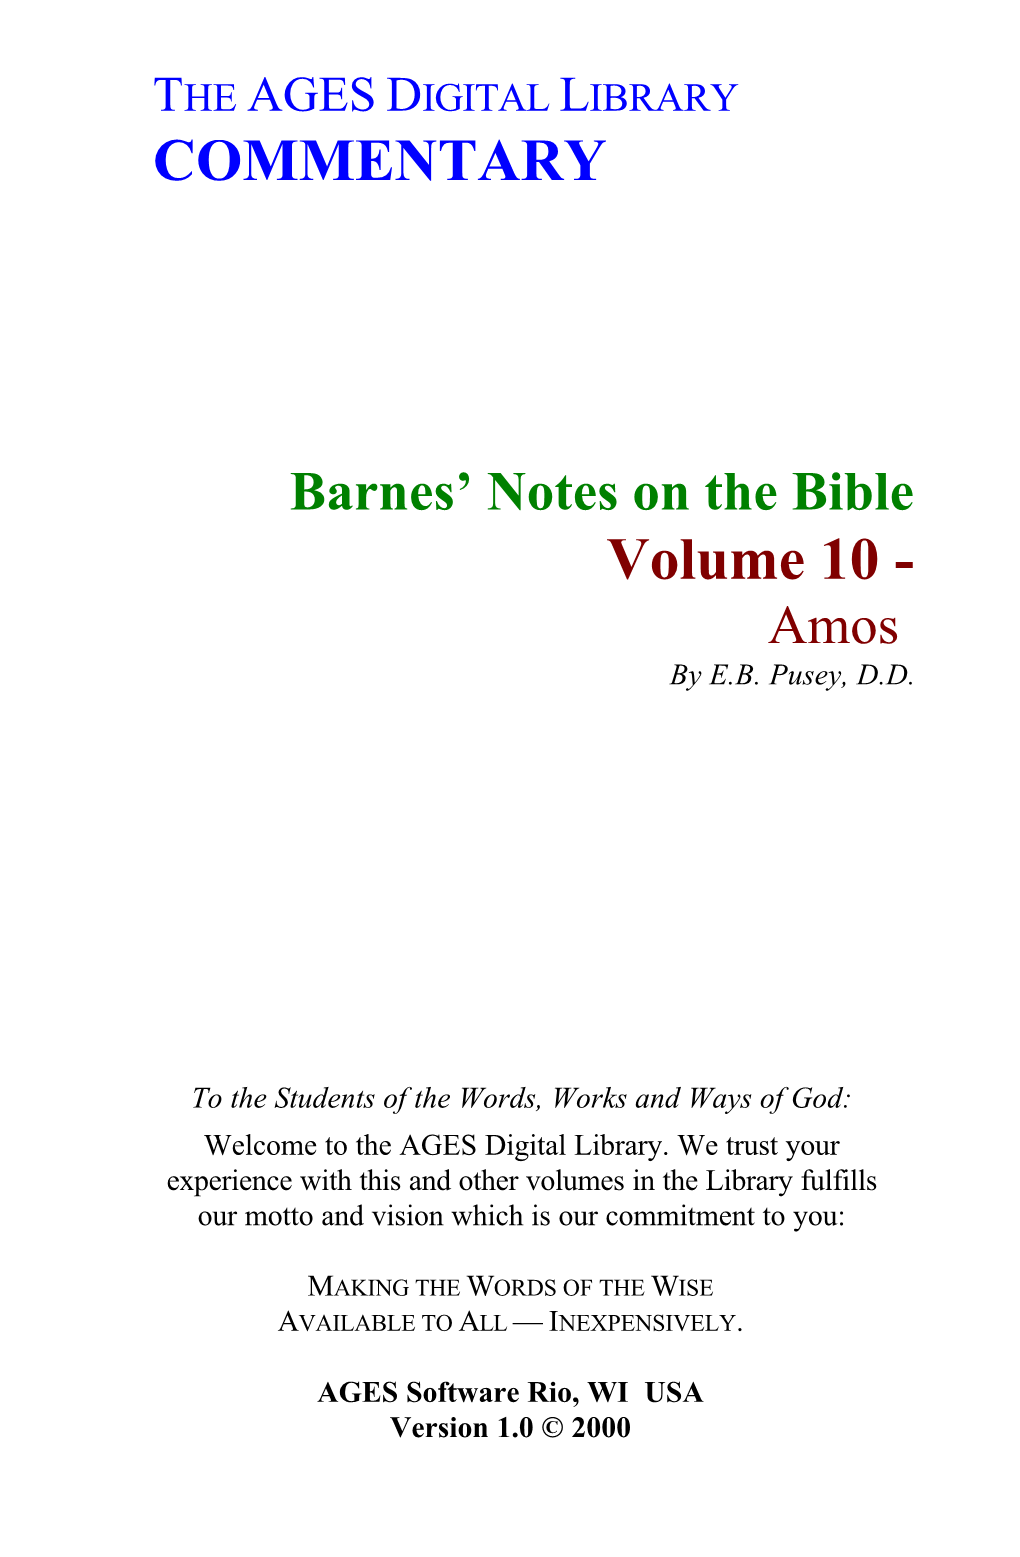 Barnes' Notes on the Bible